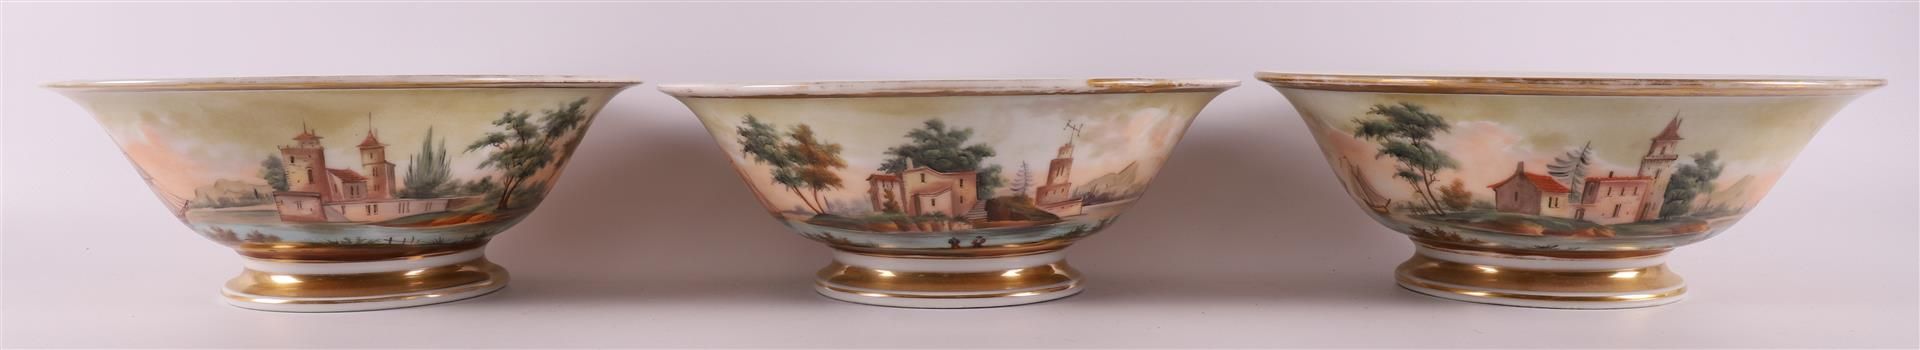 A series of three porcelain bowls, 19th century.